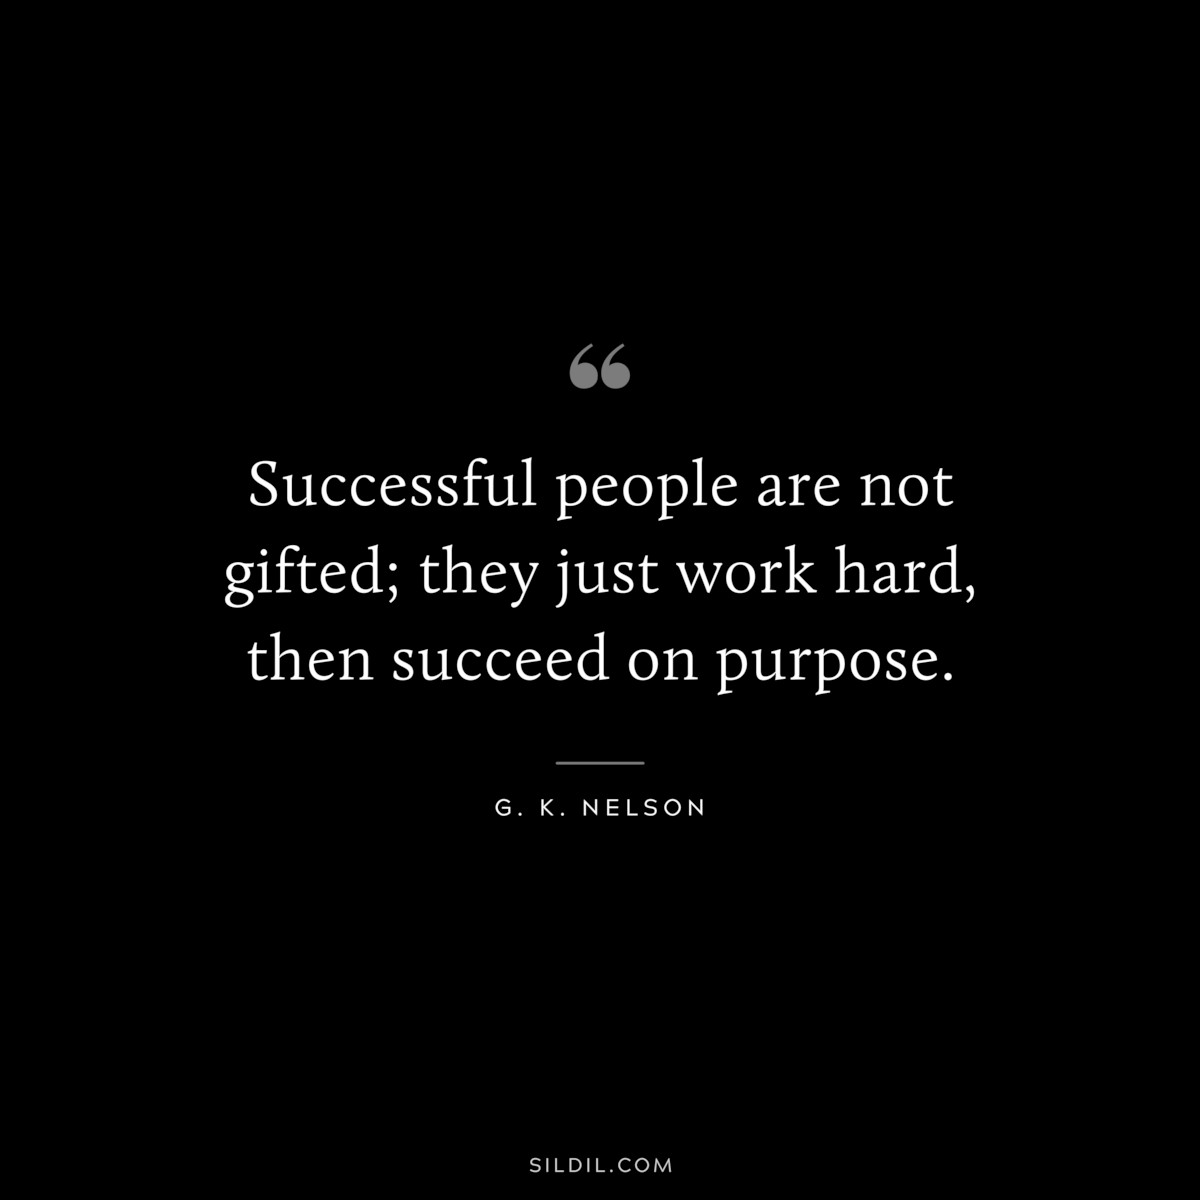 Successful people are not gifted; they just work hard, then succeed on purpose. ― G. K. Nelson